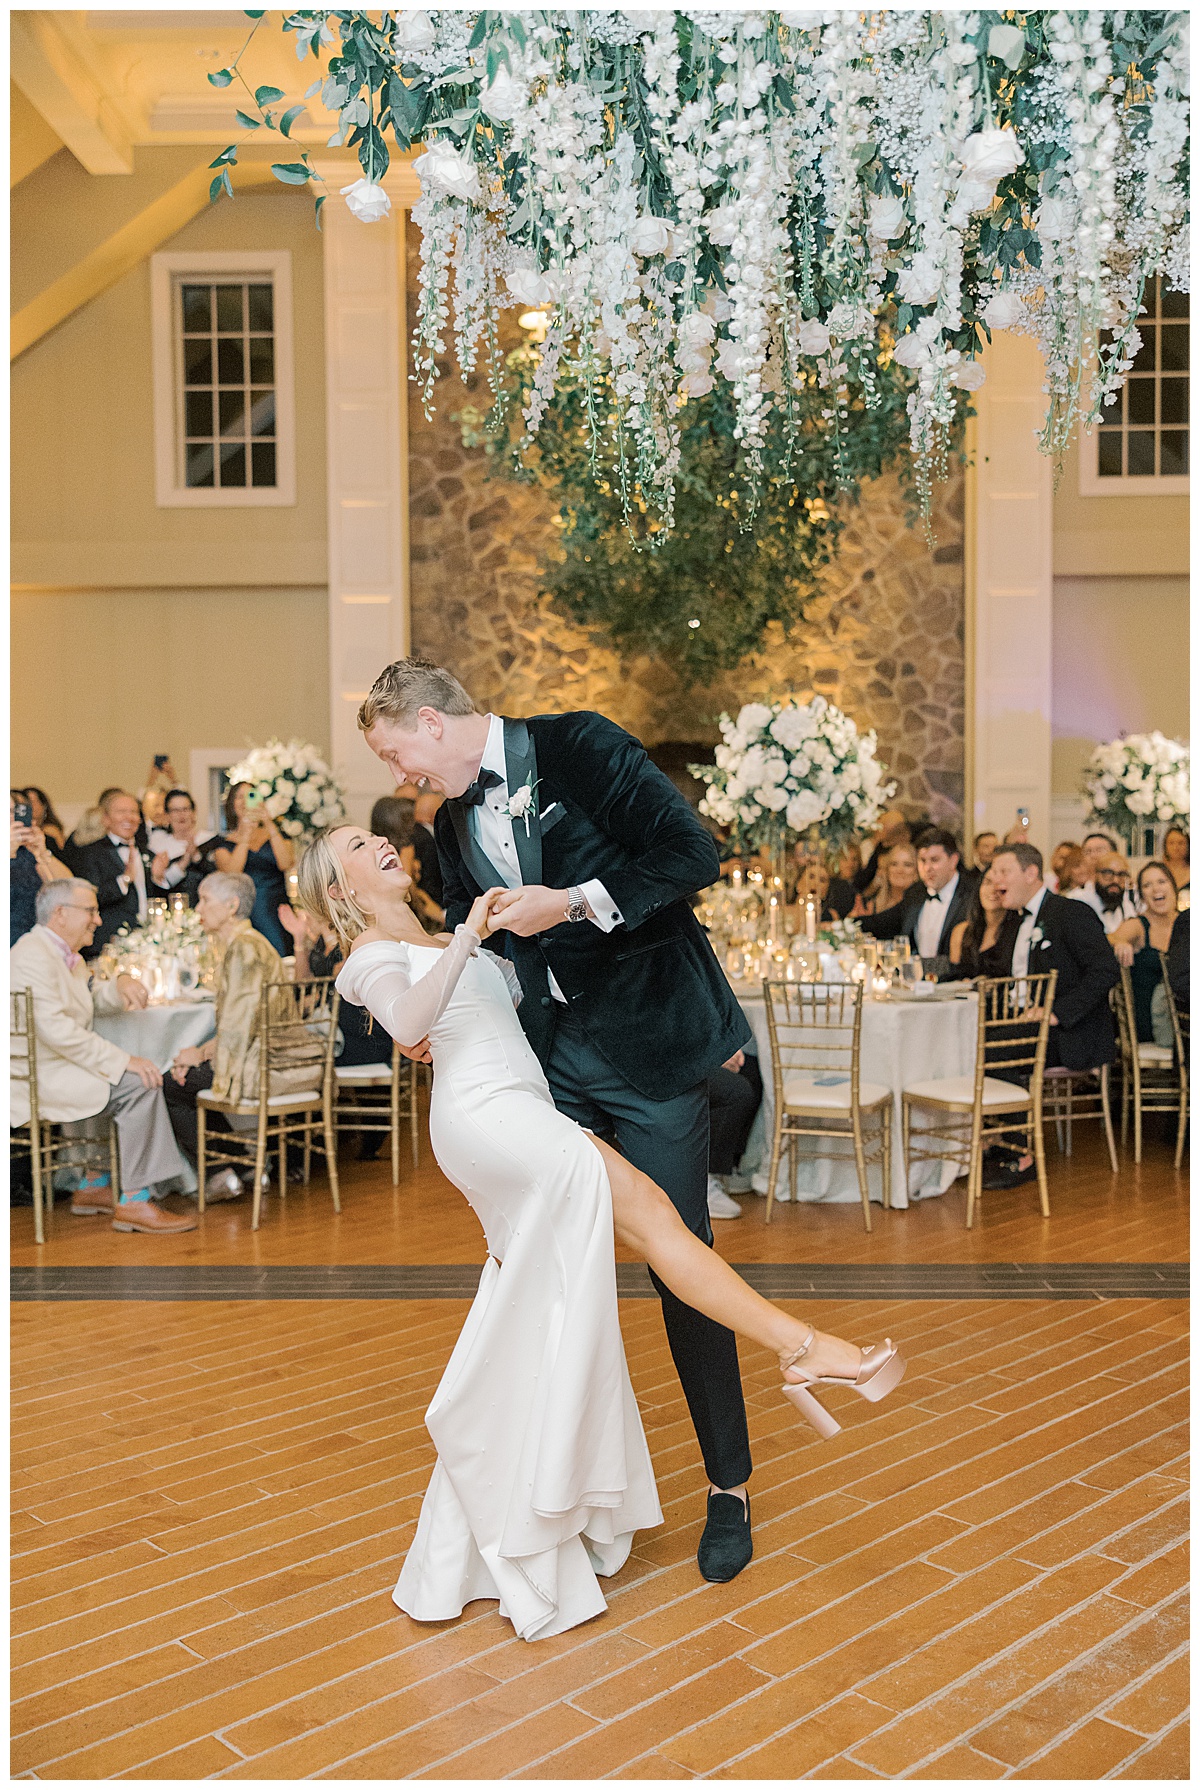 Bride and groom share their first dance together at The Ryland Inn as the guests cheer and clap. 